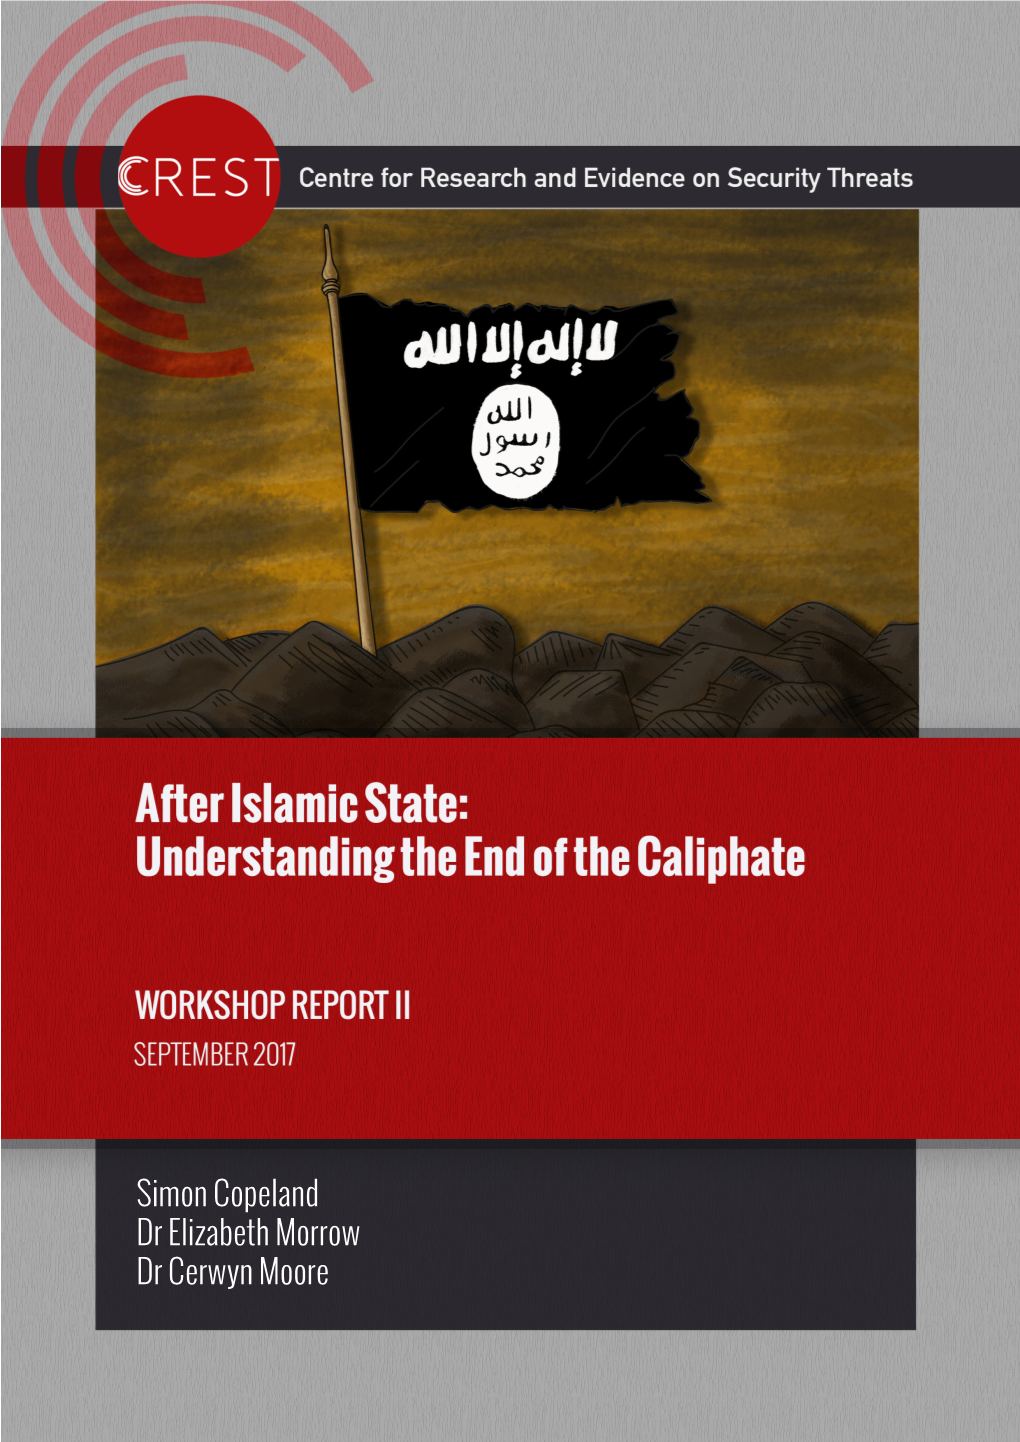 After Islamic State: Understanding the End of the Caliphate WORKSHOP REPORT II